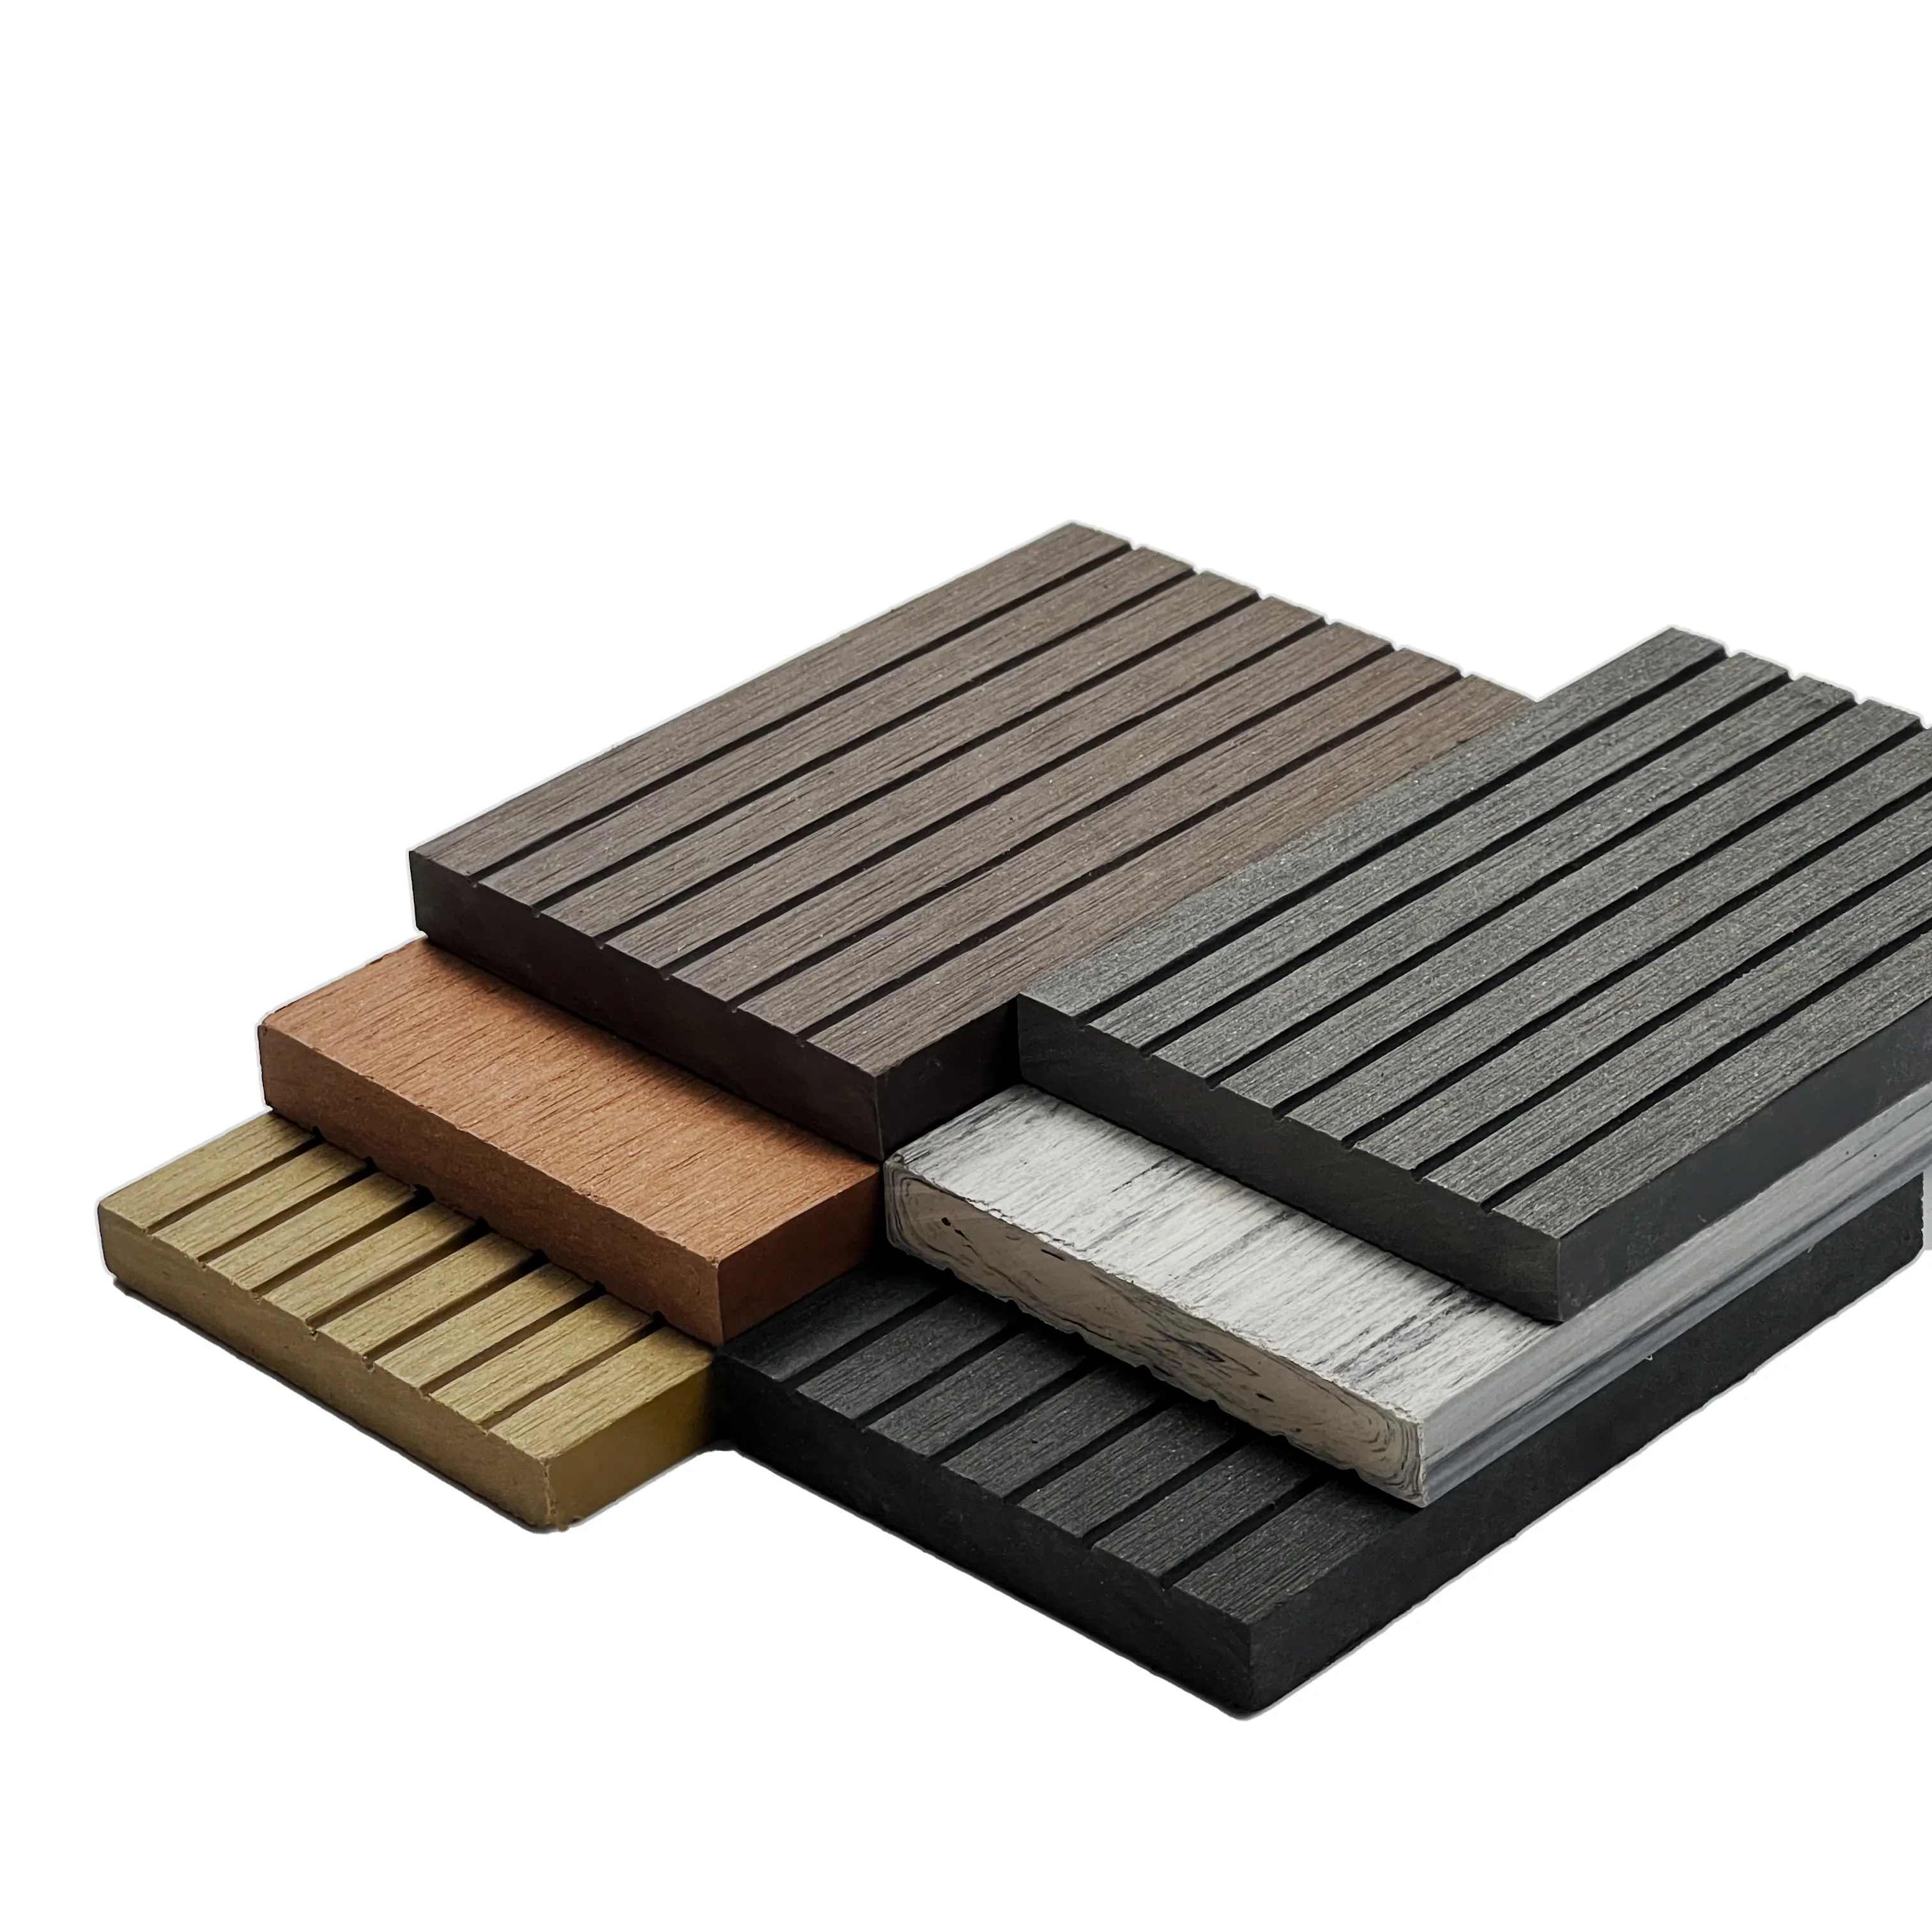 exterior WPC Wood Plastic Composite Decking Flooring Boards for Outdoor/Pool/Garden/Balcony/Patio/terrace rookie of the year